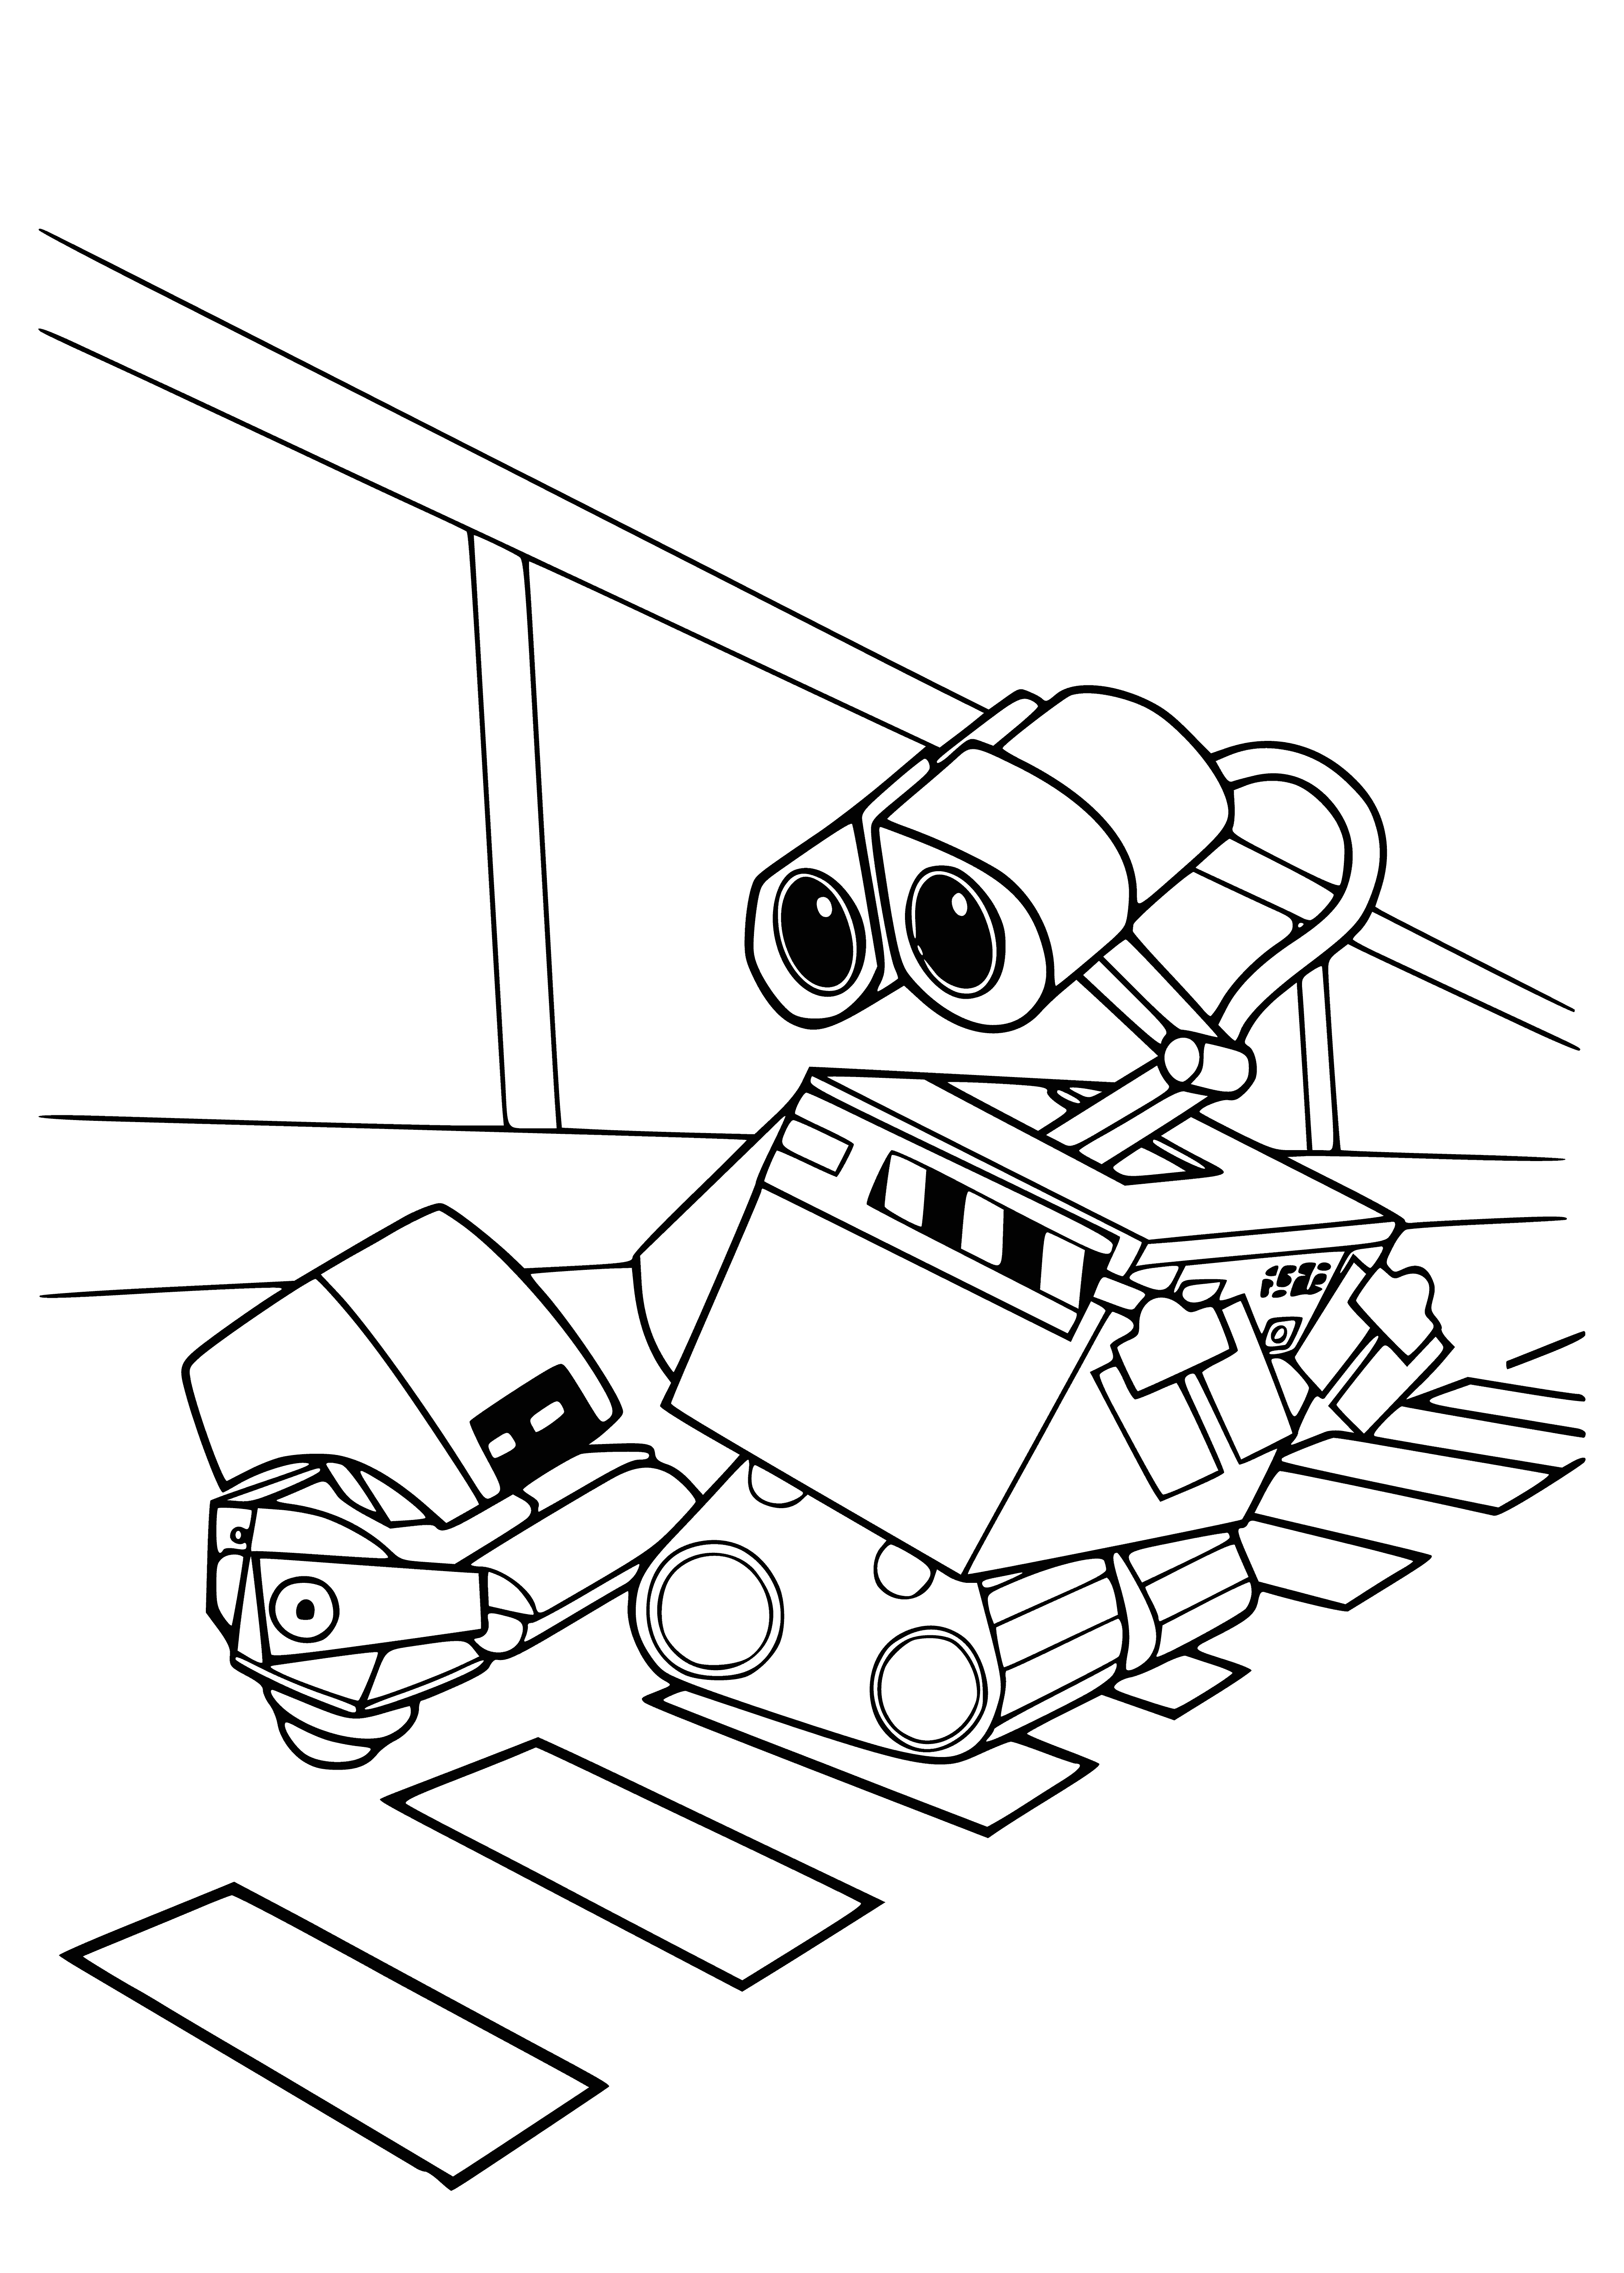 Valley intruder coloring page